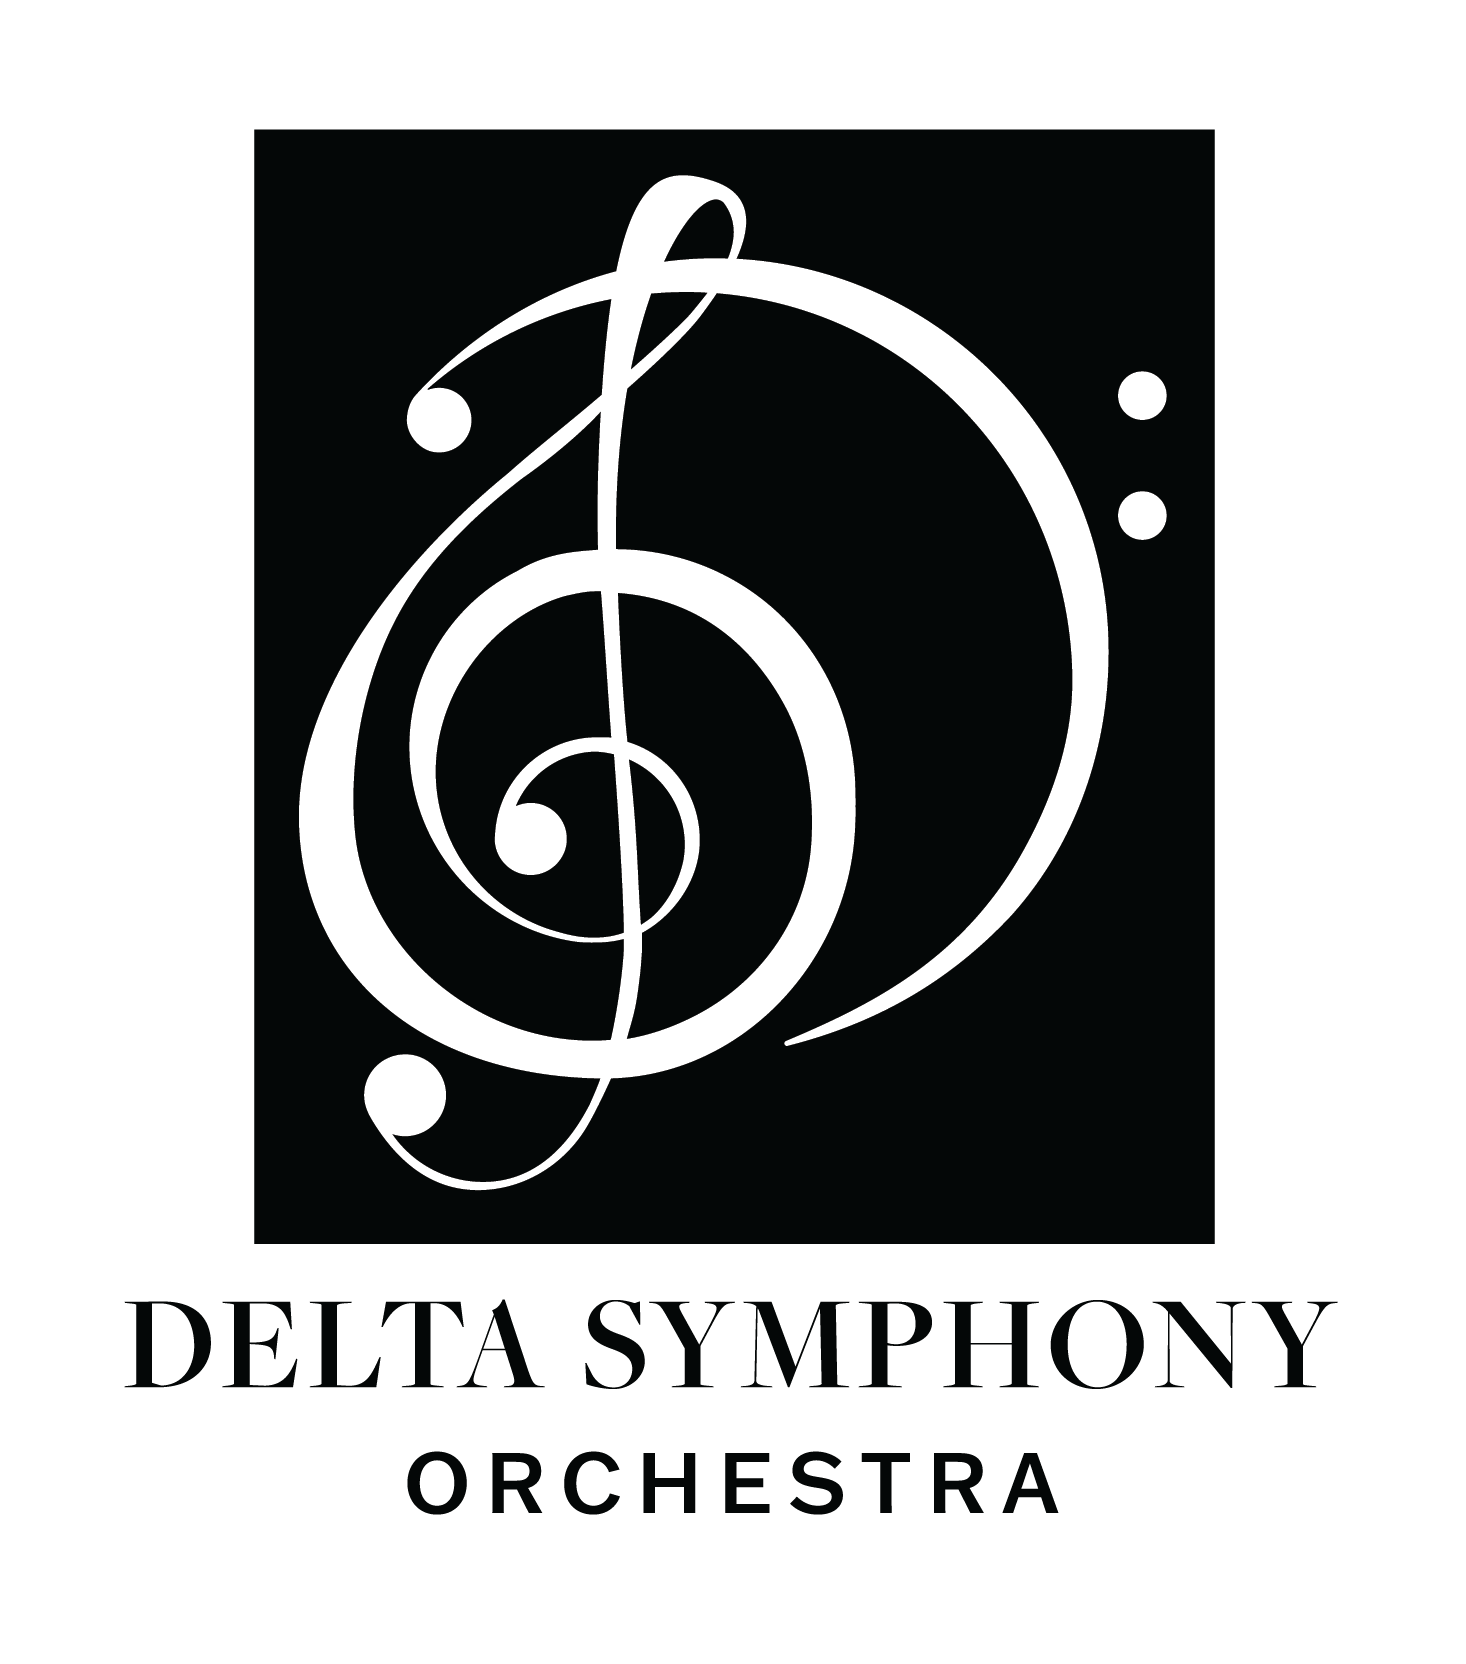 Delta Symphony Orchestra black and white logo showing black rectangle with combined treble and bass clef symbols to create DS for Delta Symphony in white, black text underneath saying Delta Symphony Orchestra